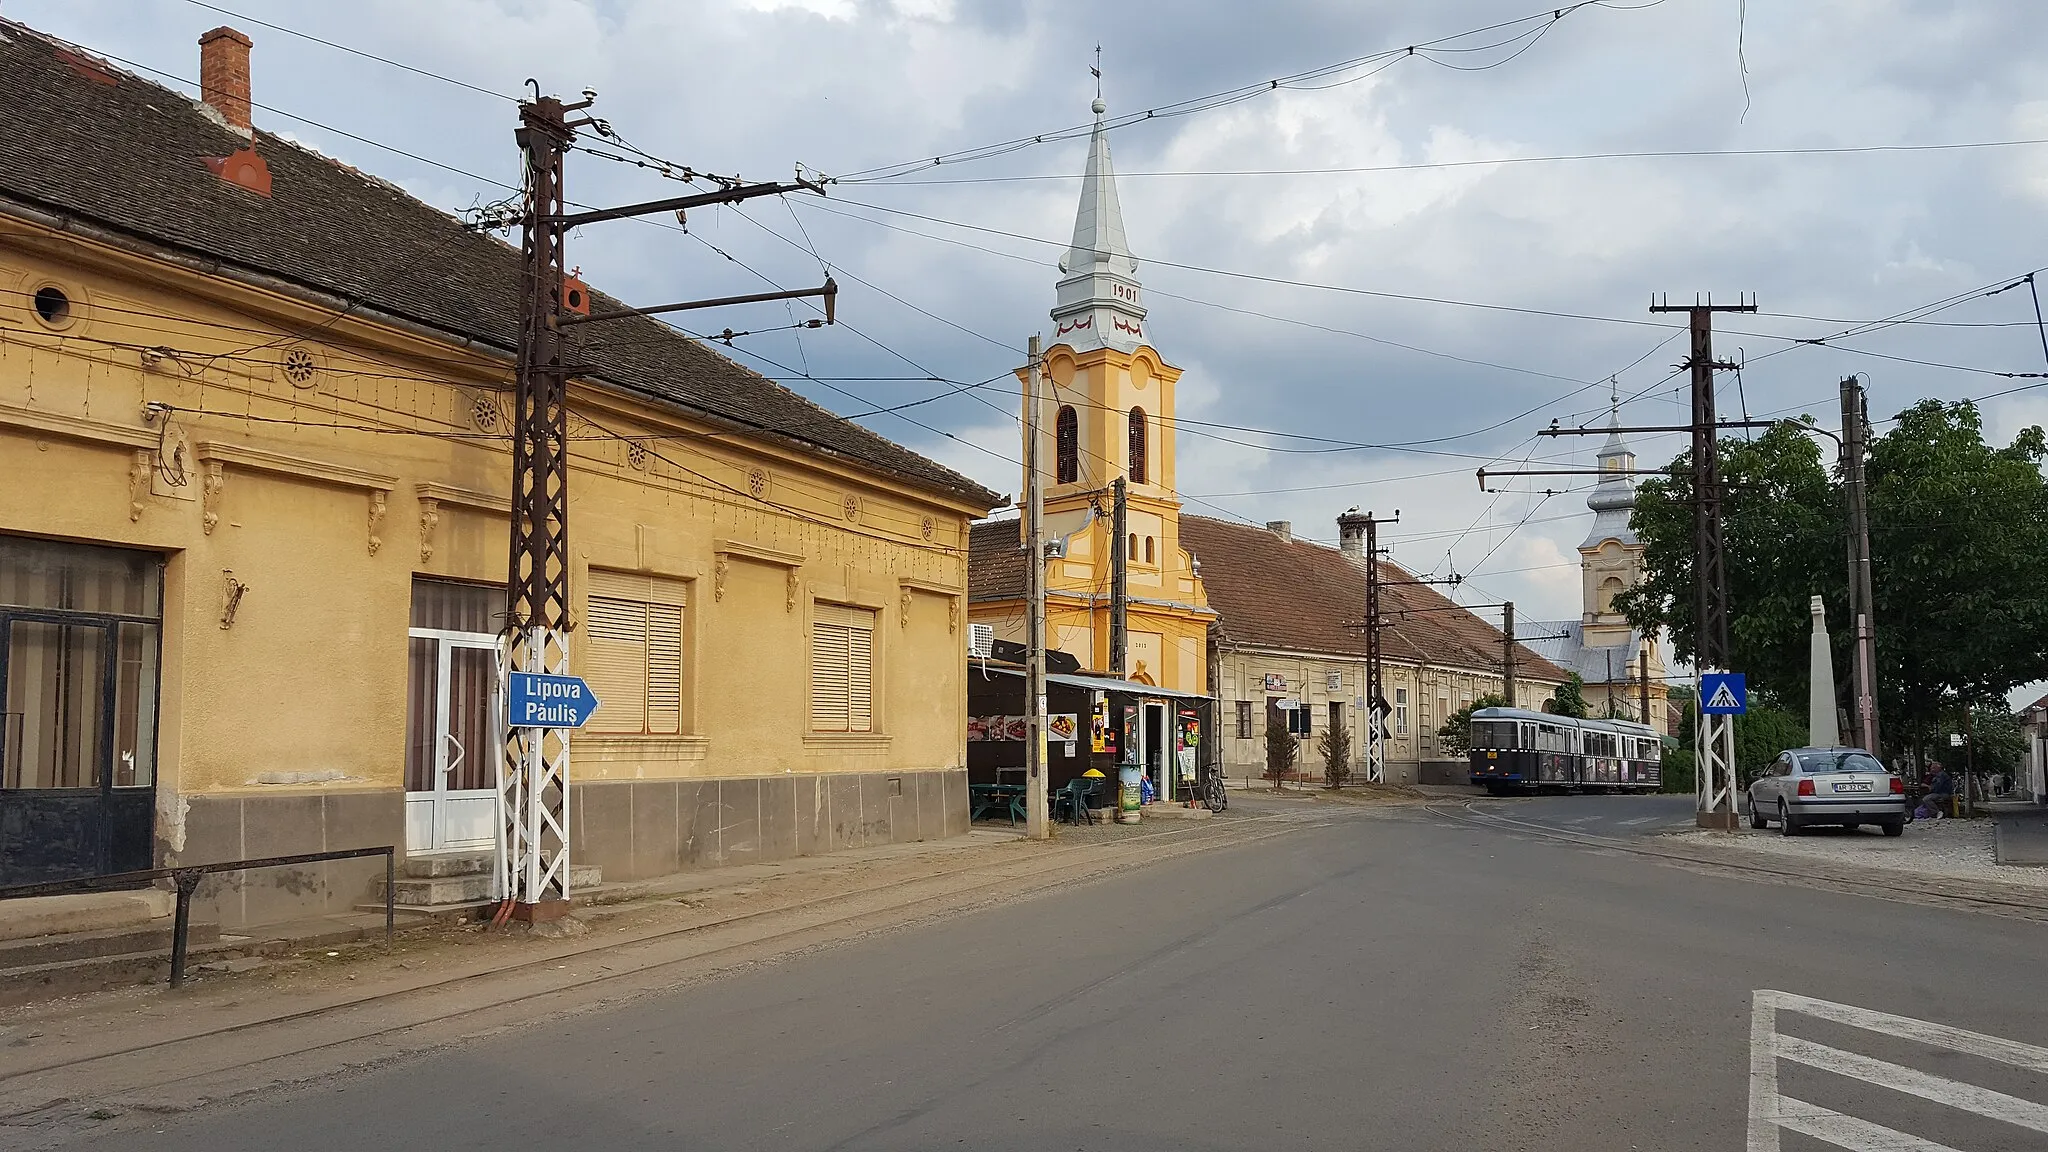 Photo showing: A tram at the end of track in Ghioroc, Romania